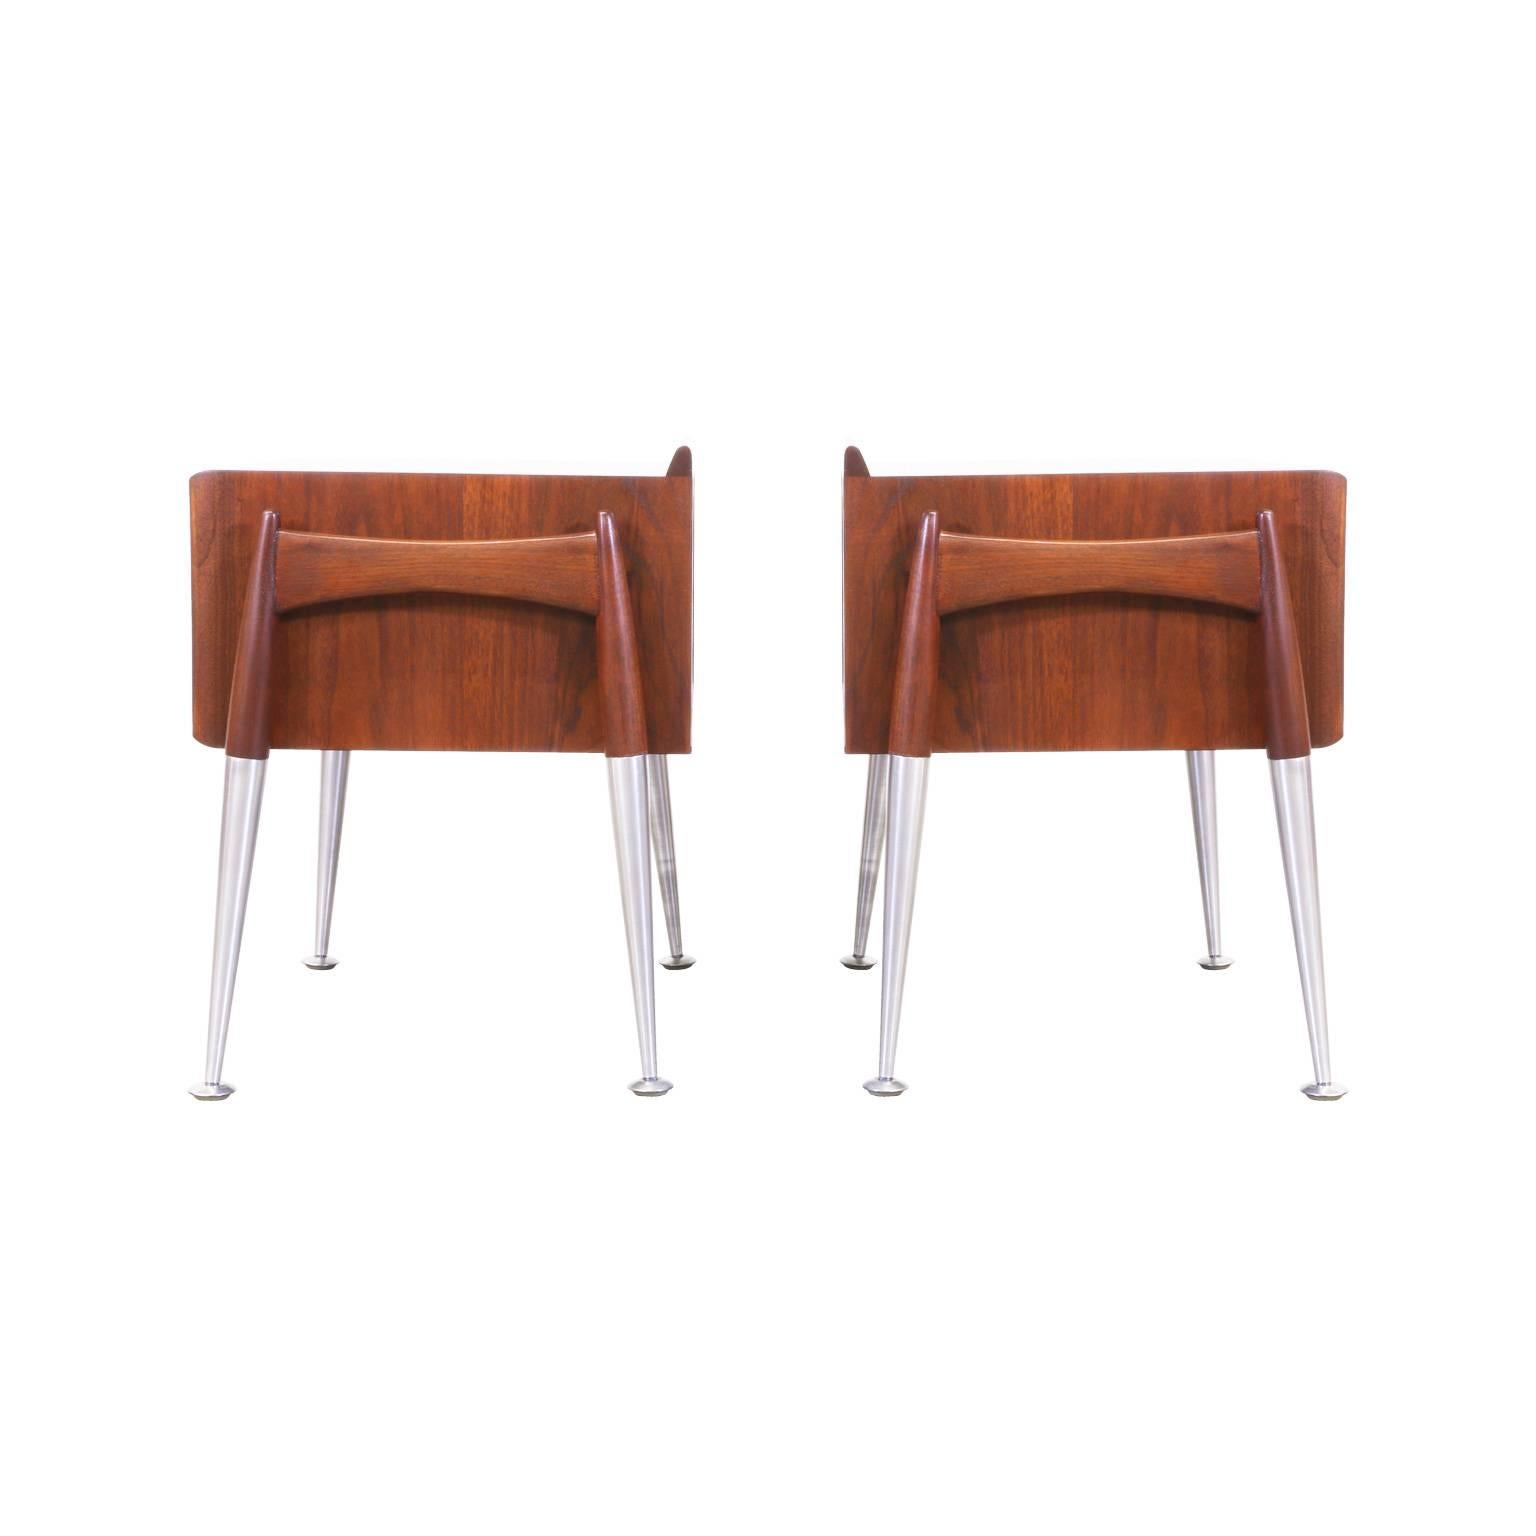 Mid-20th Century Midcentury Walnut and Steel Floating Night Stands